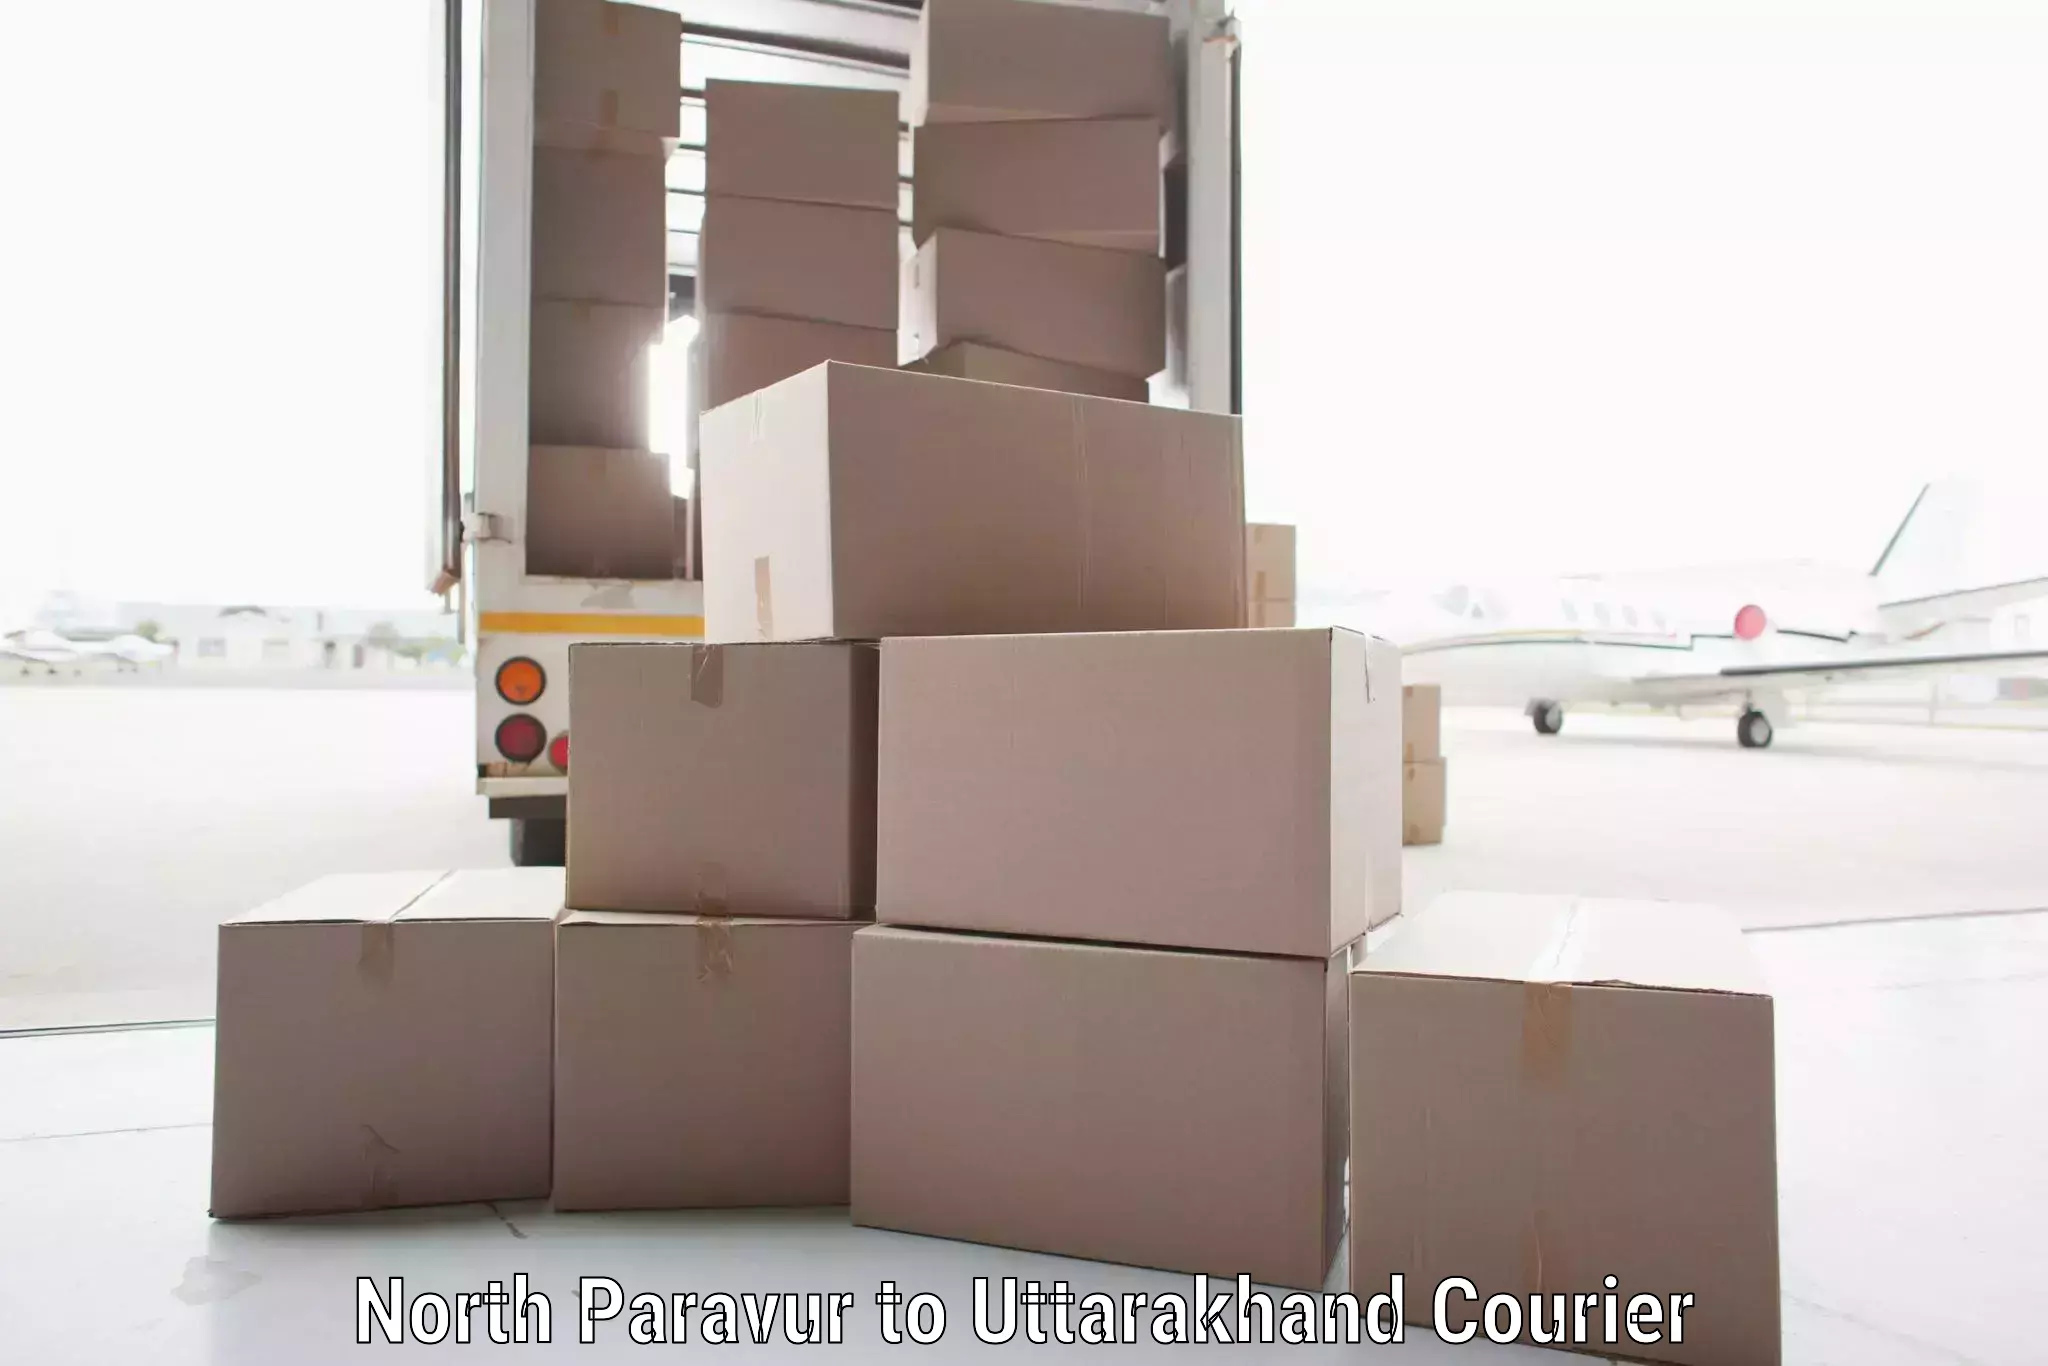 Dynamic courier operations in North Paravur to IIT Roorkee